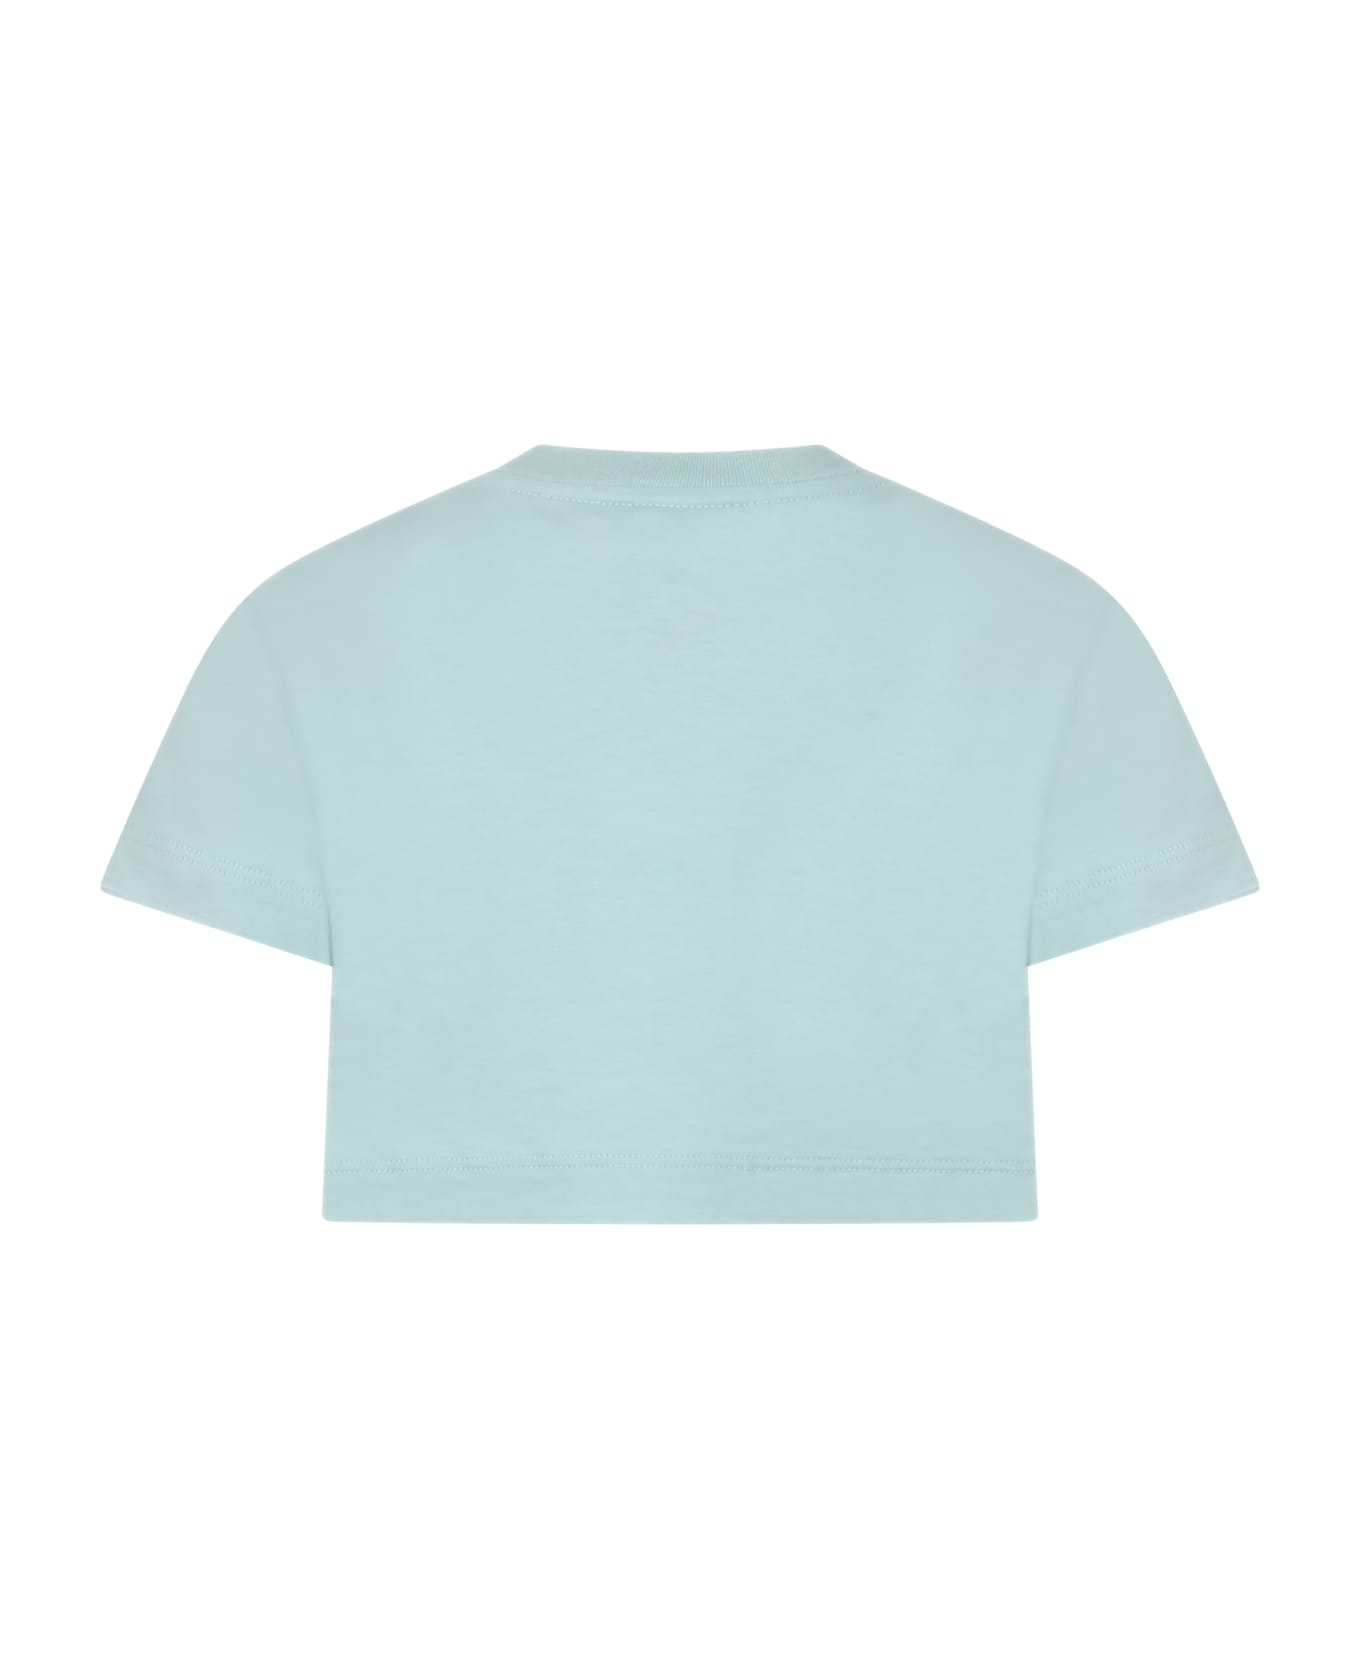 Fendi Green T-shirt For Girl With Printed Girl - Green